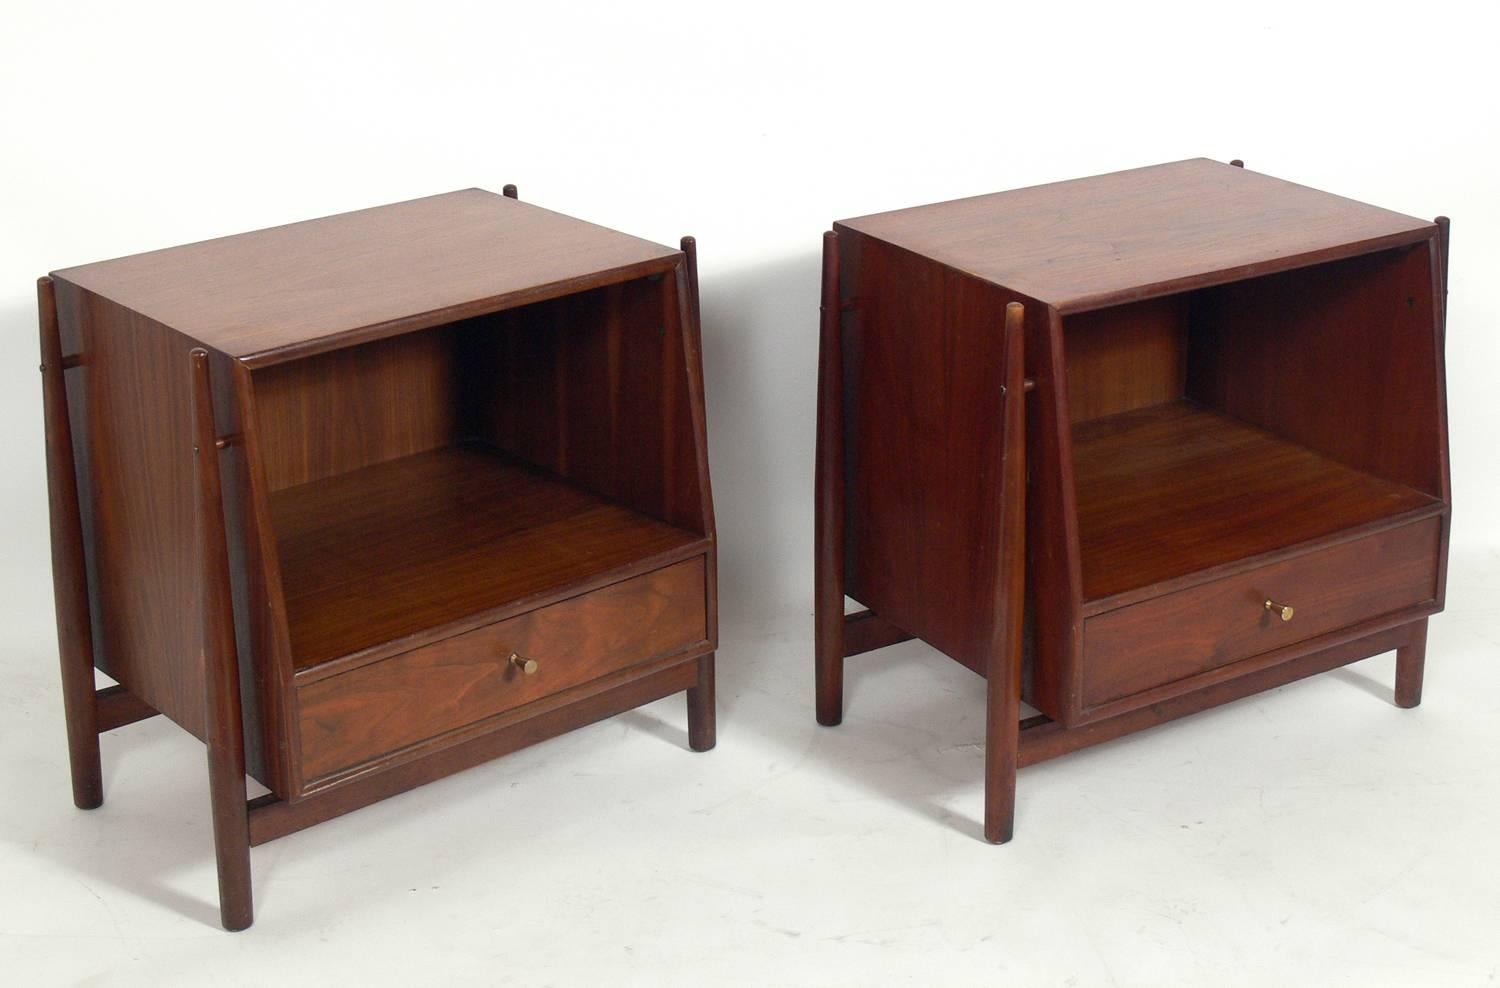 Pair of modern walnut nightstands, designed by Kipp Stewart for Drexel, circa 1960s. They are a versatile size and can be used as nightstands or as end or side tables. They are currently being refinished and can be refinished in your choice of